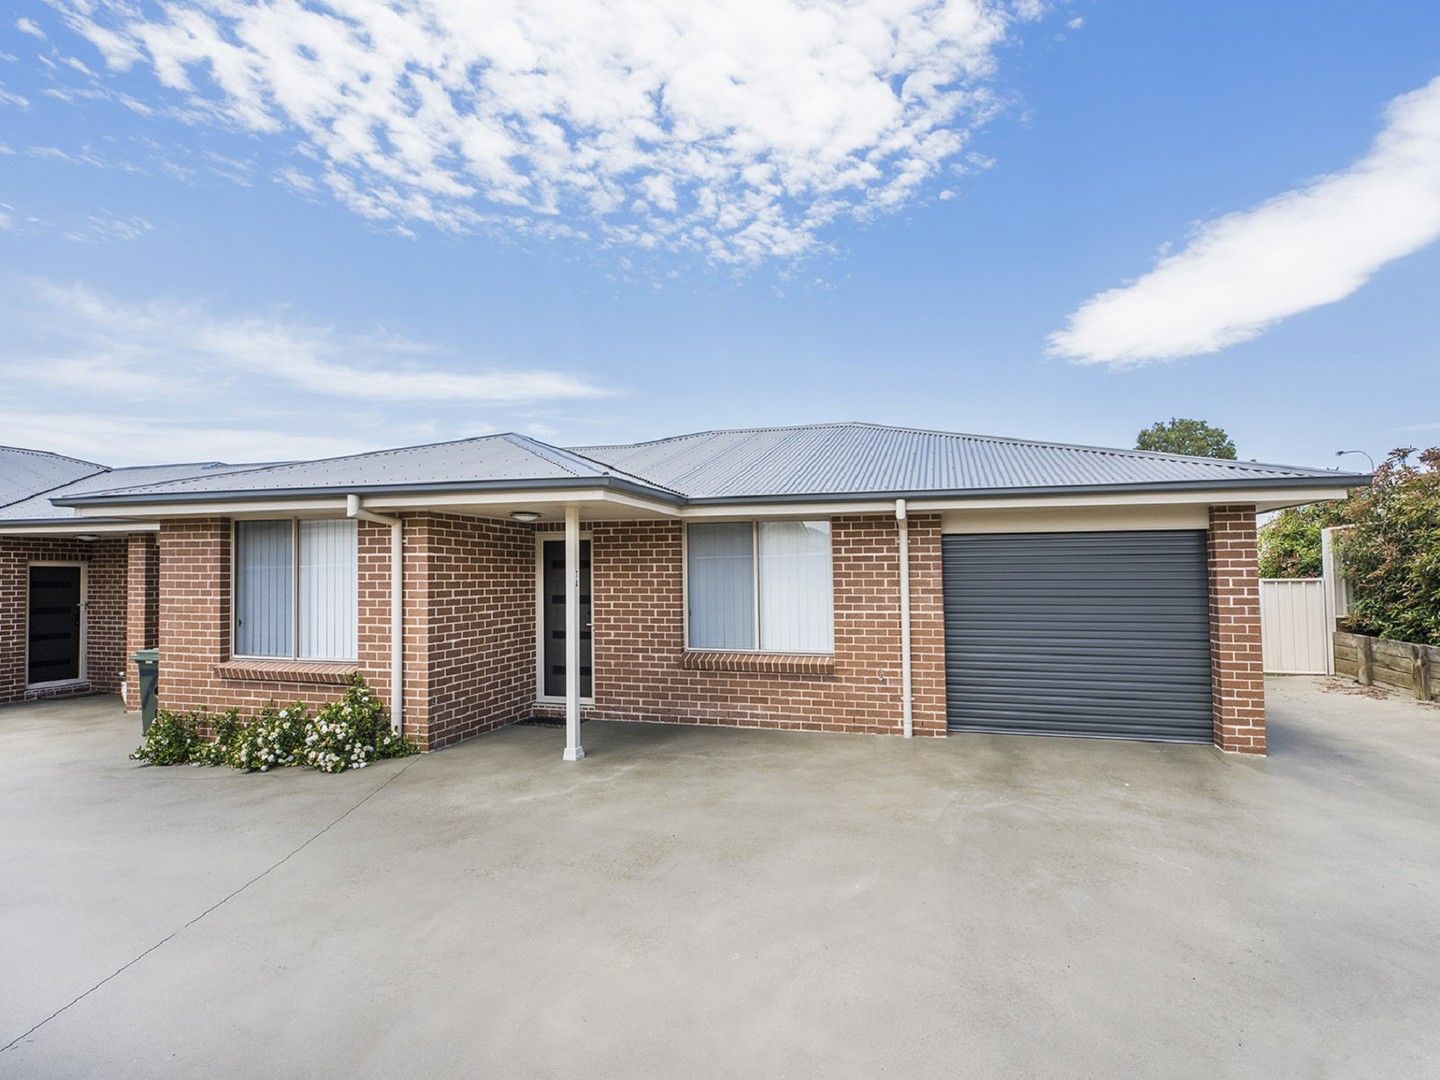 2 bedrooms House in 7A Tebbutt Court MUDGEE NSW, 2850